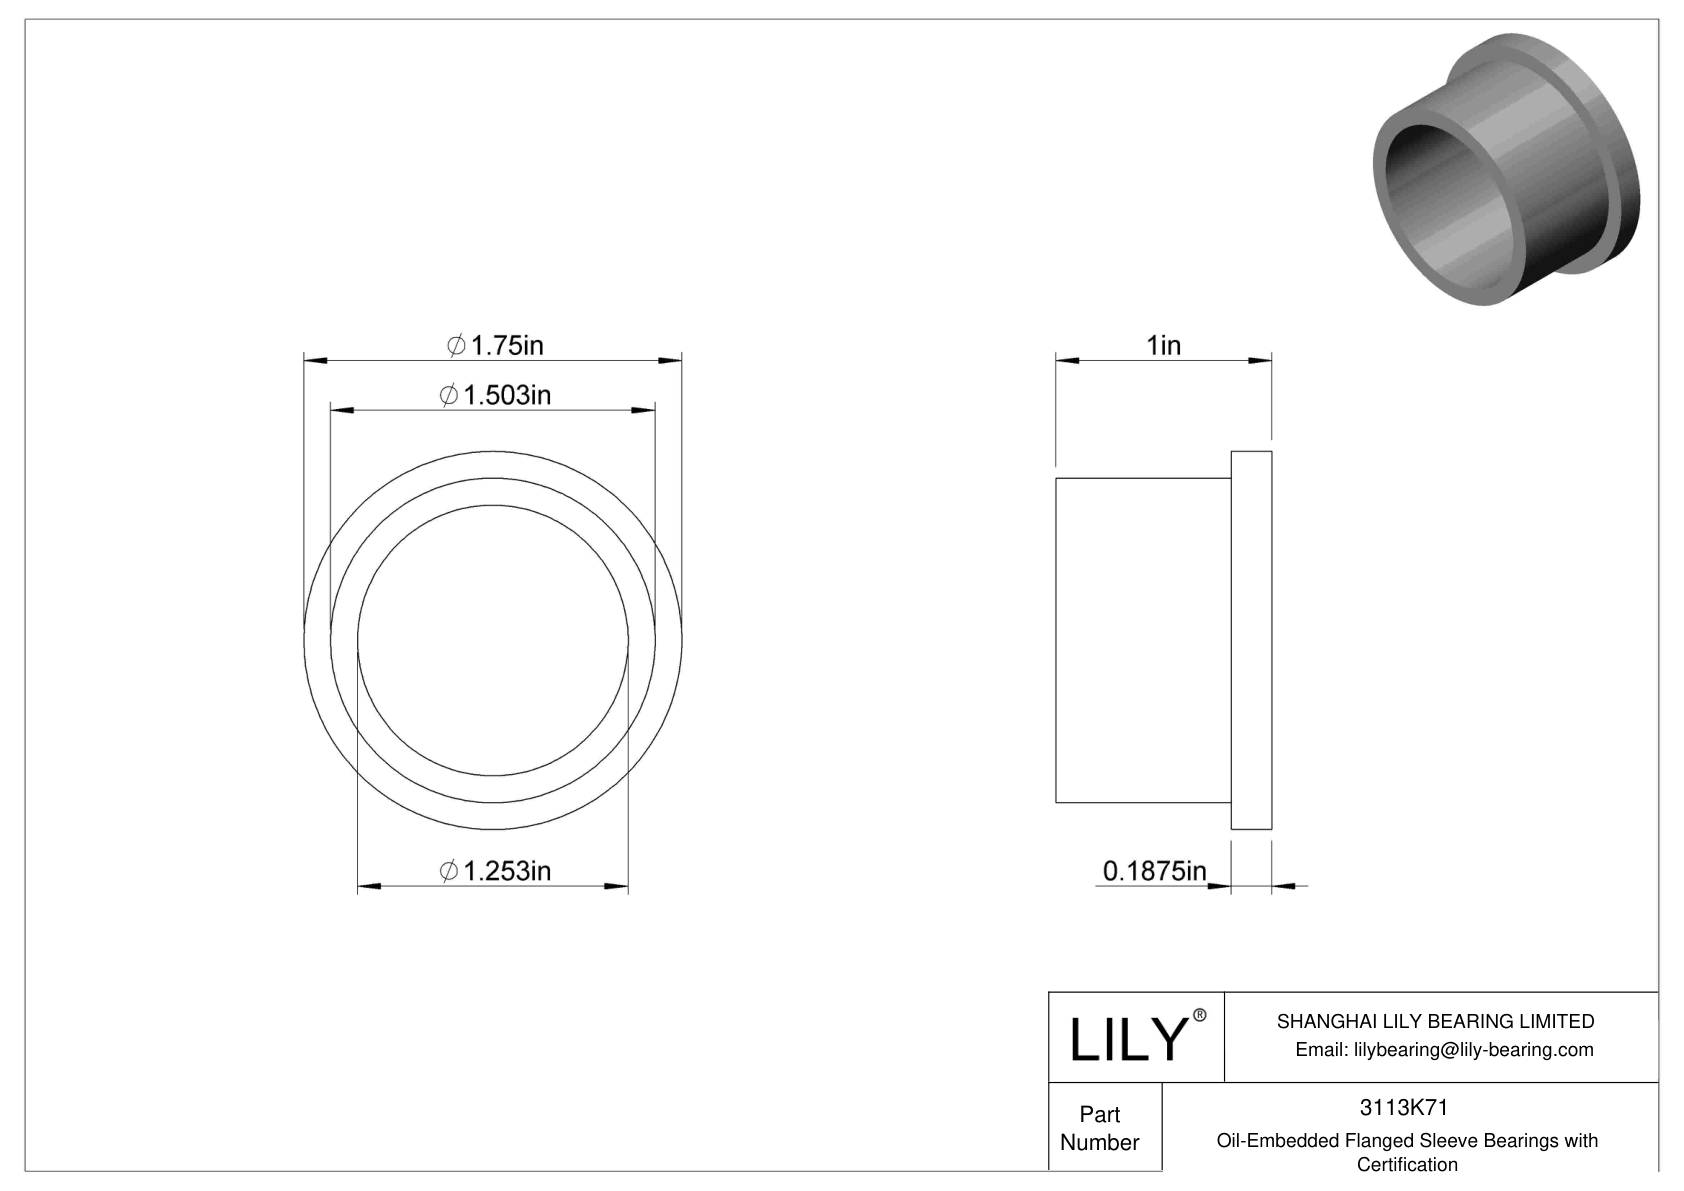 DBBDKHB Oil-Embedded Flanged Sleeve Bearings with Certification cad drawing